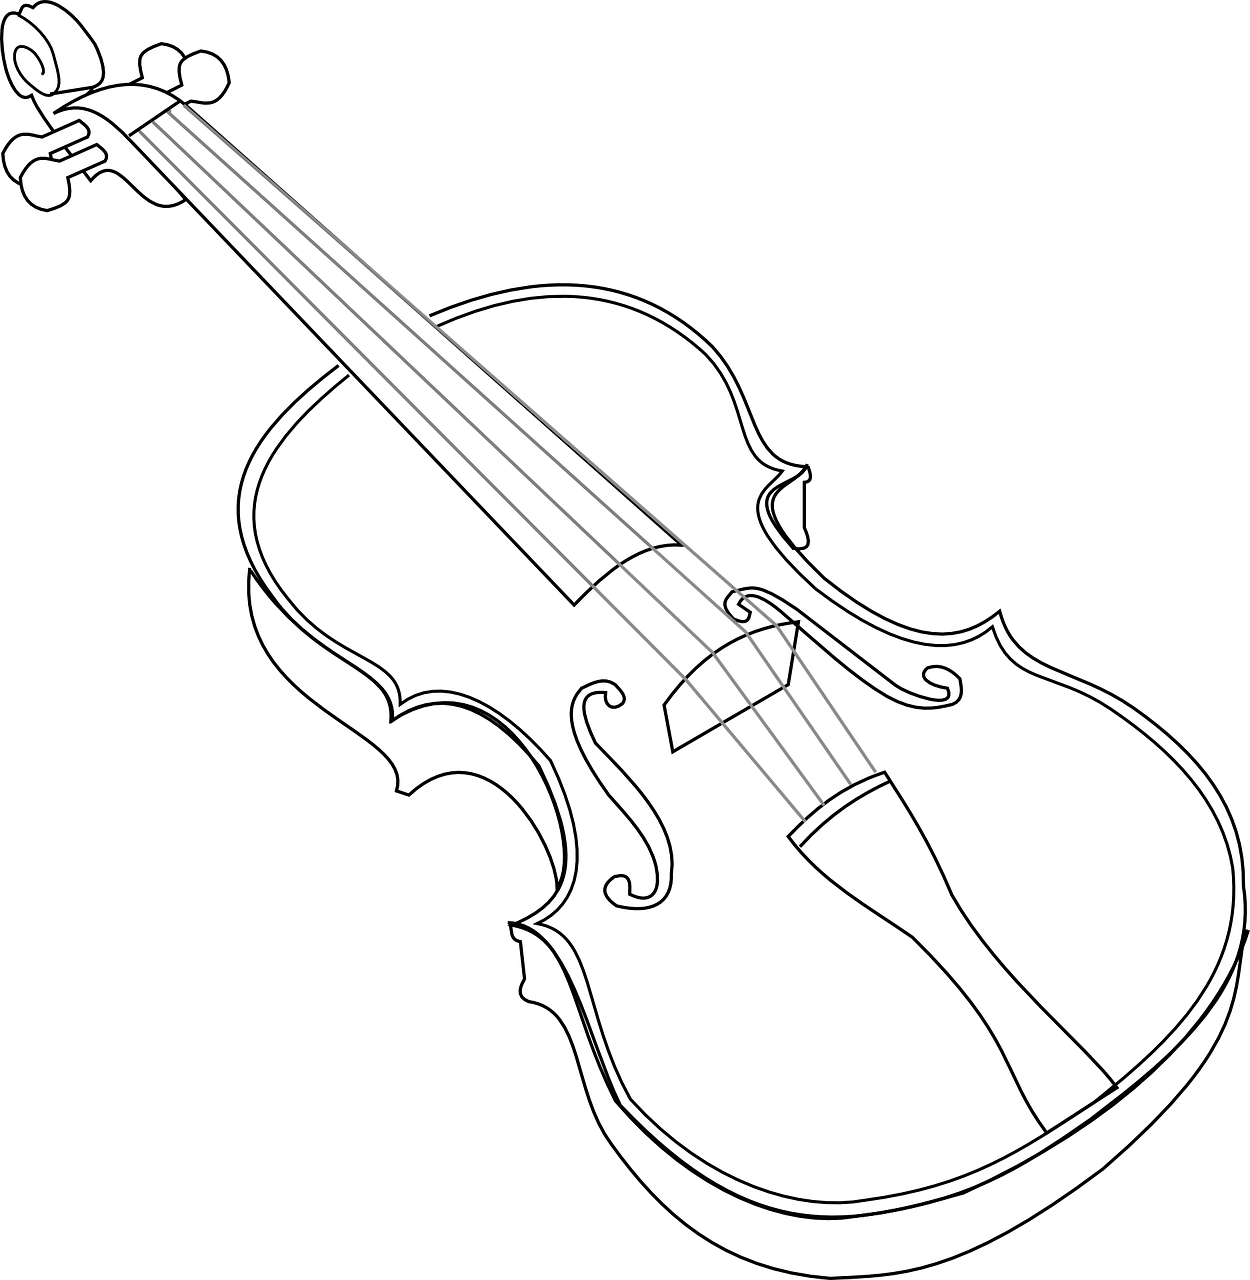 a close up of a violin on a black background, inspired by Pedro Álvarez Castelló, deviantart, minimalism, black and white vector, forks, 3/4 view from below, four arms